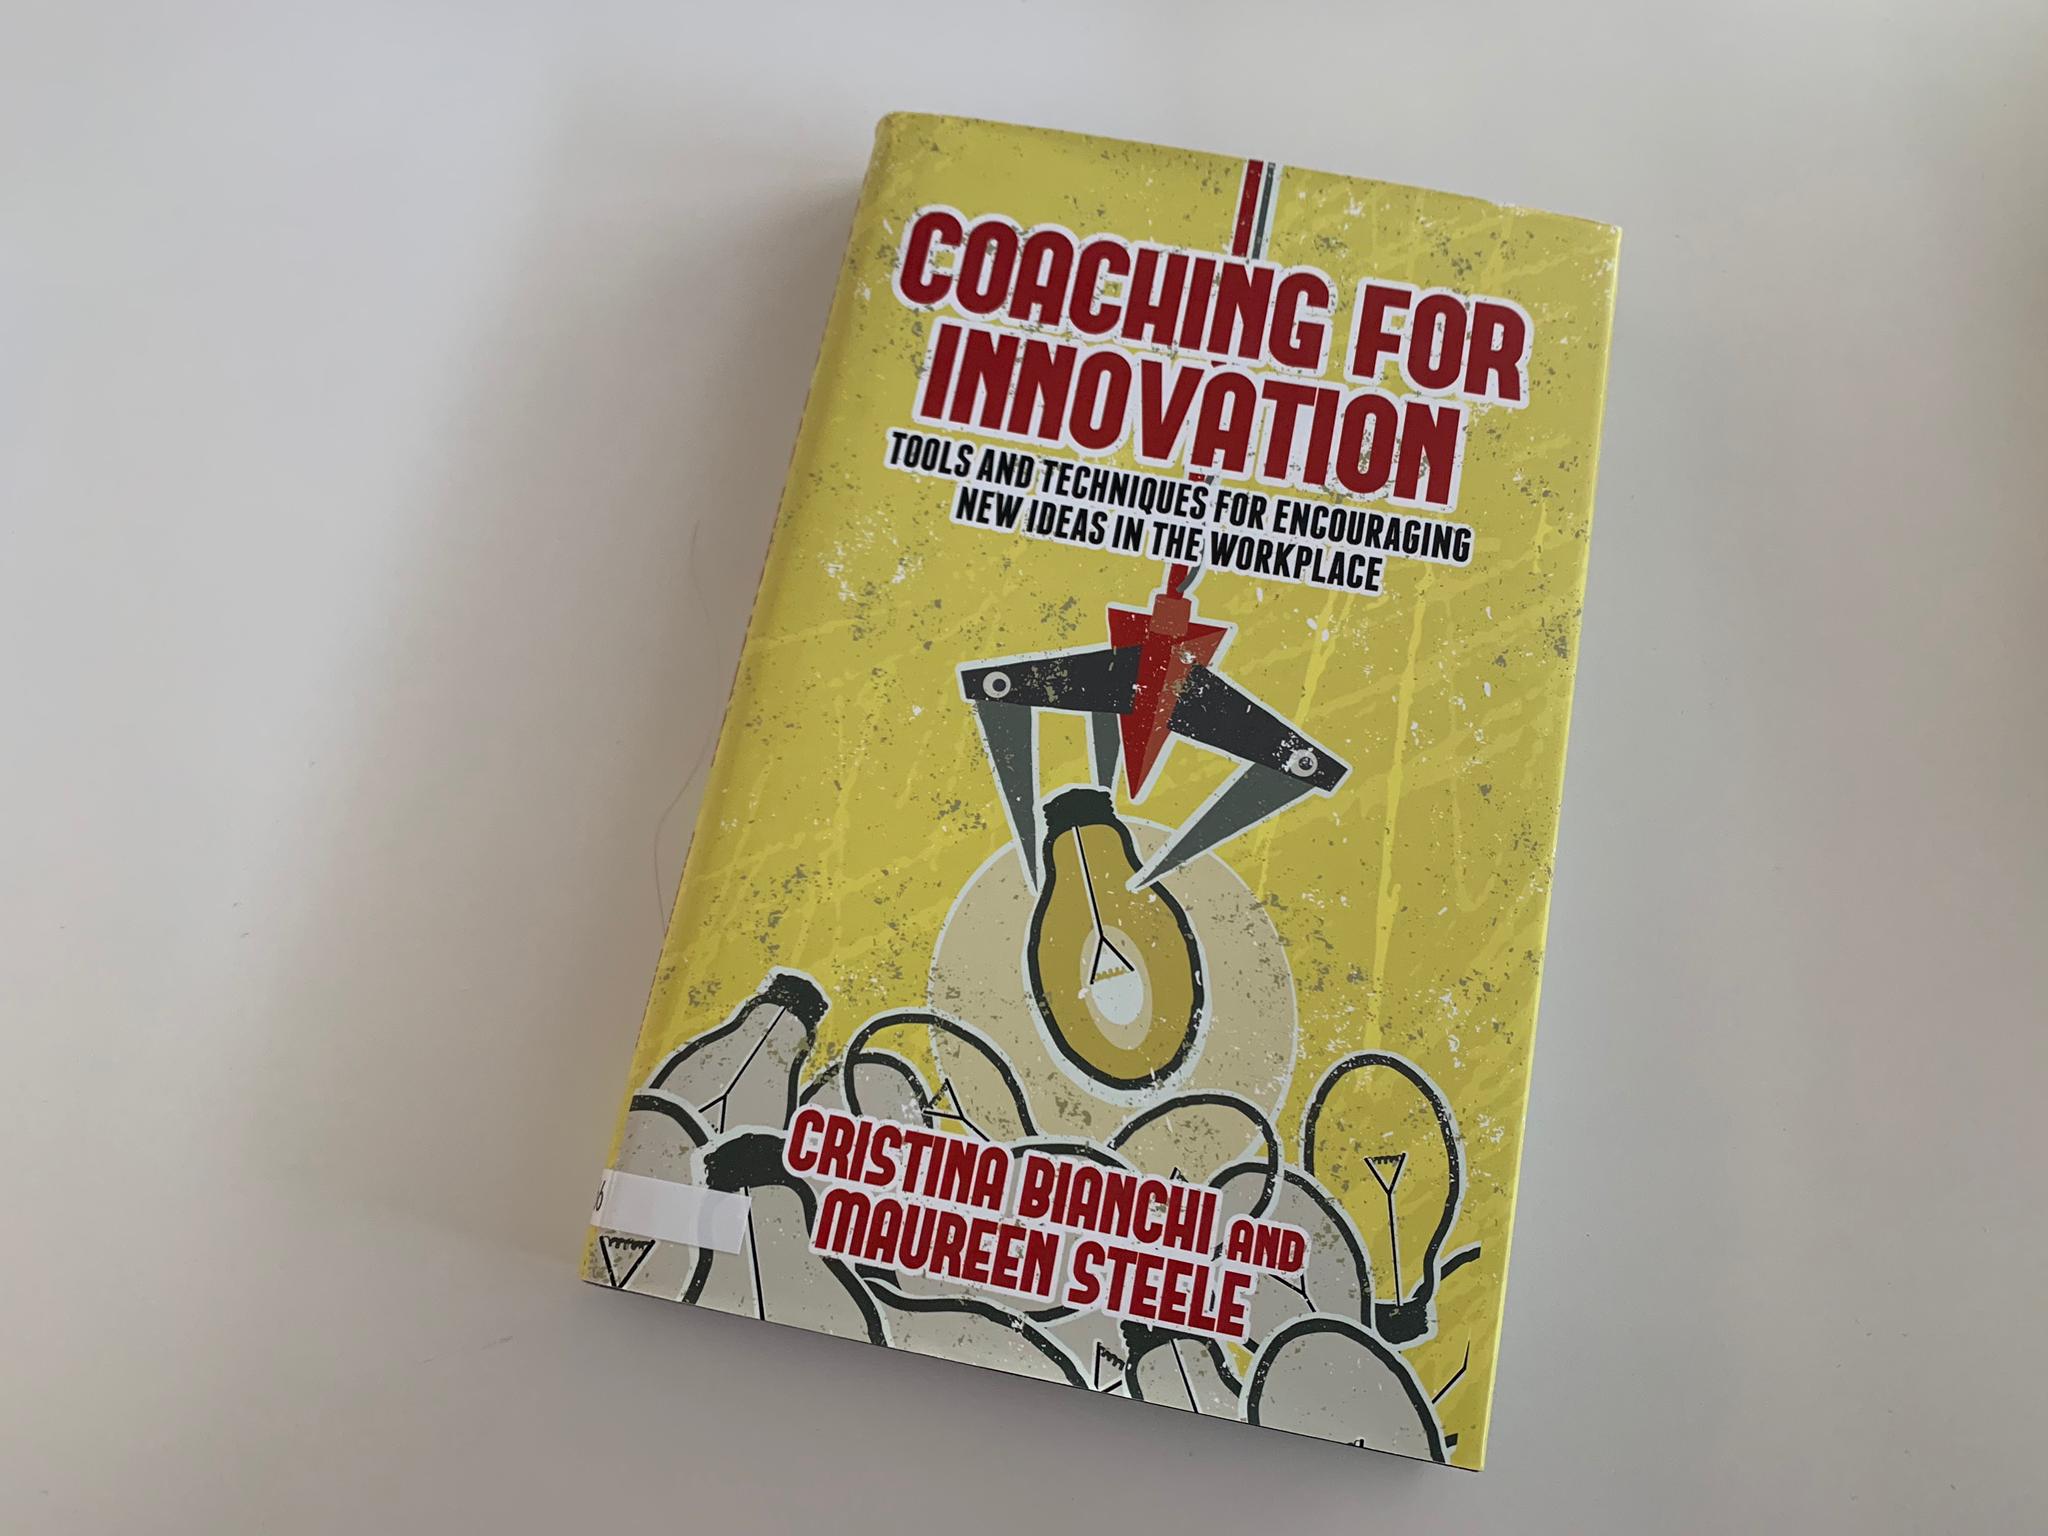 Coaching for innovation